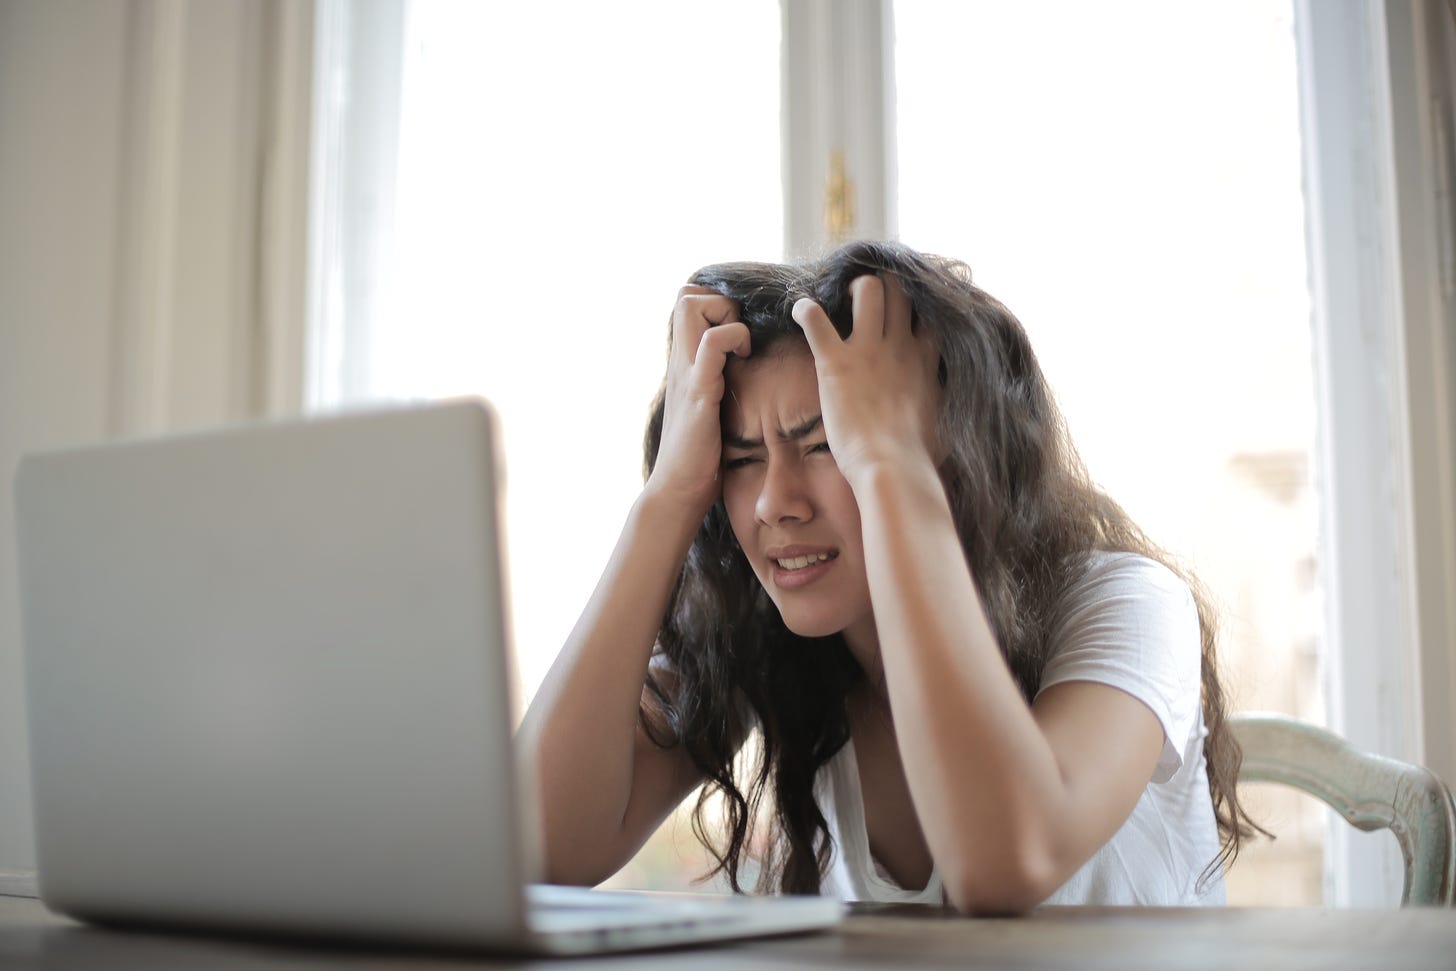 Frustrated person in front of laptop